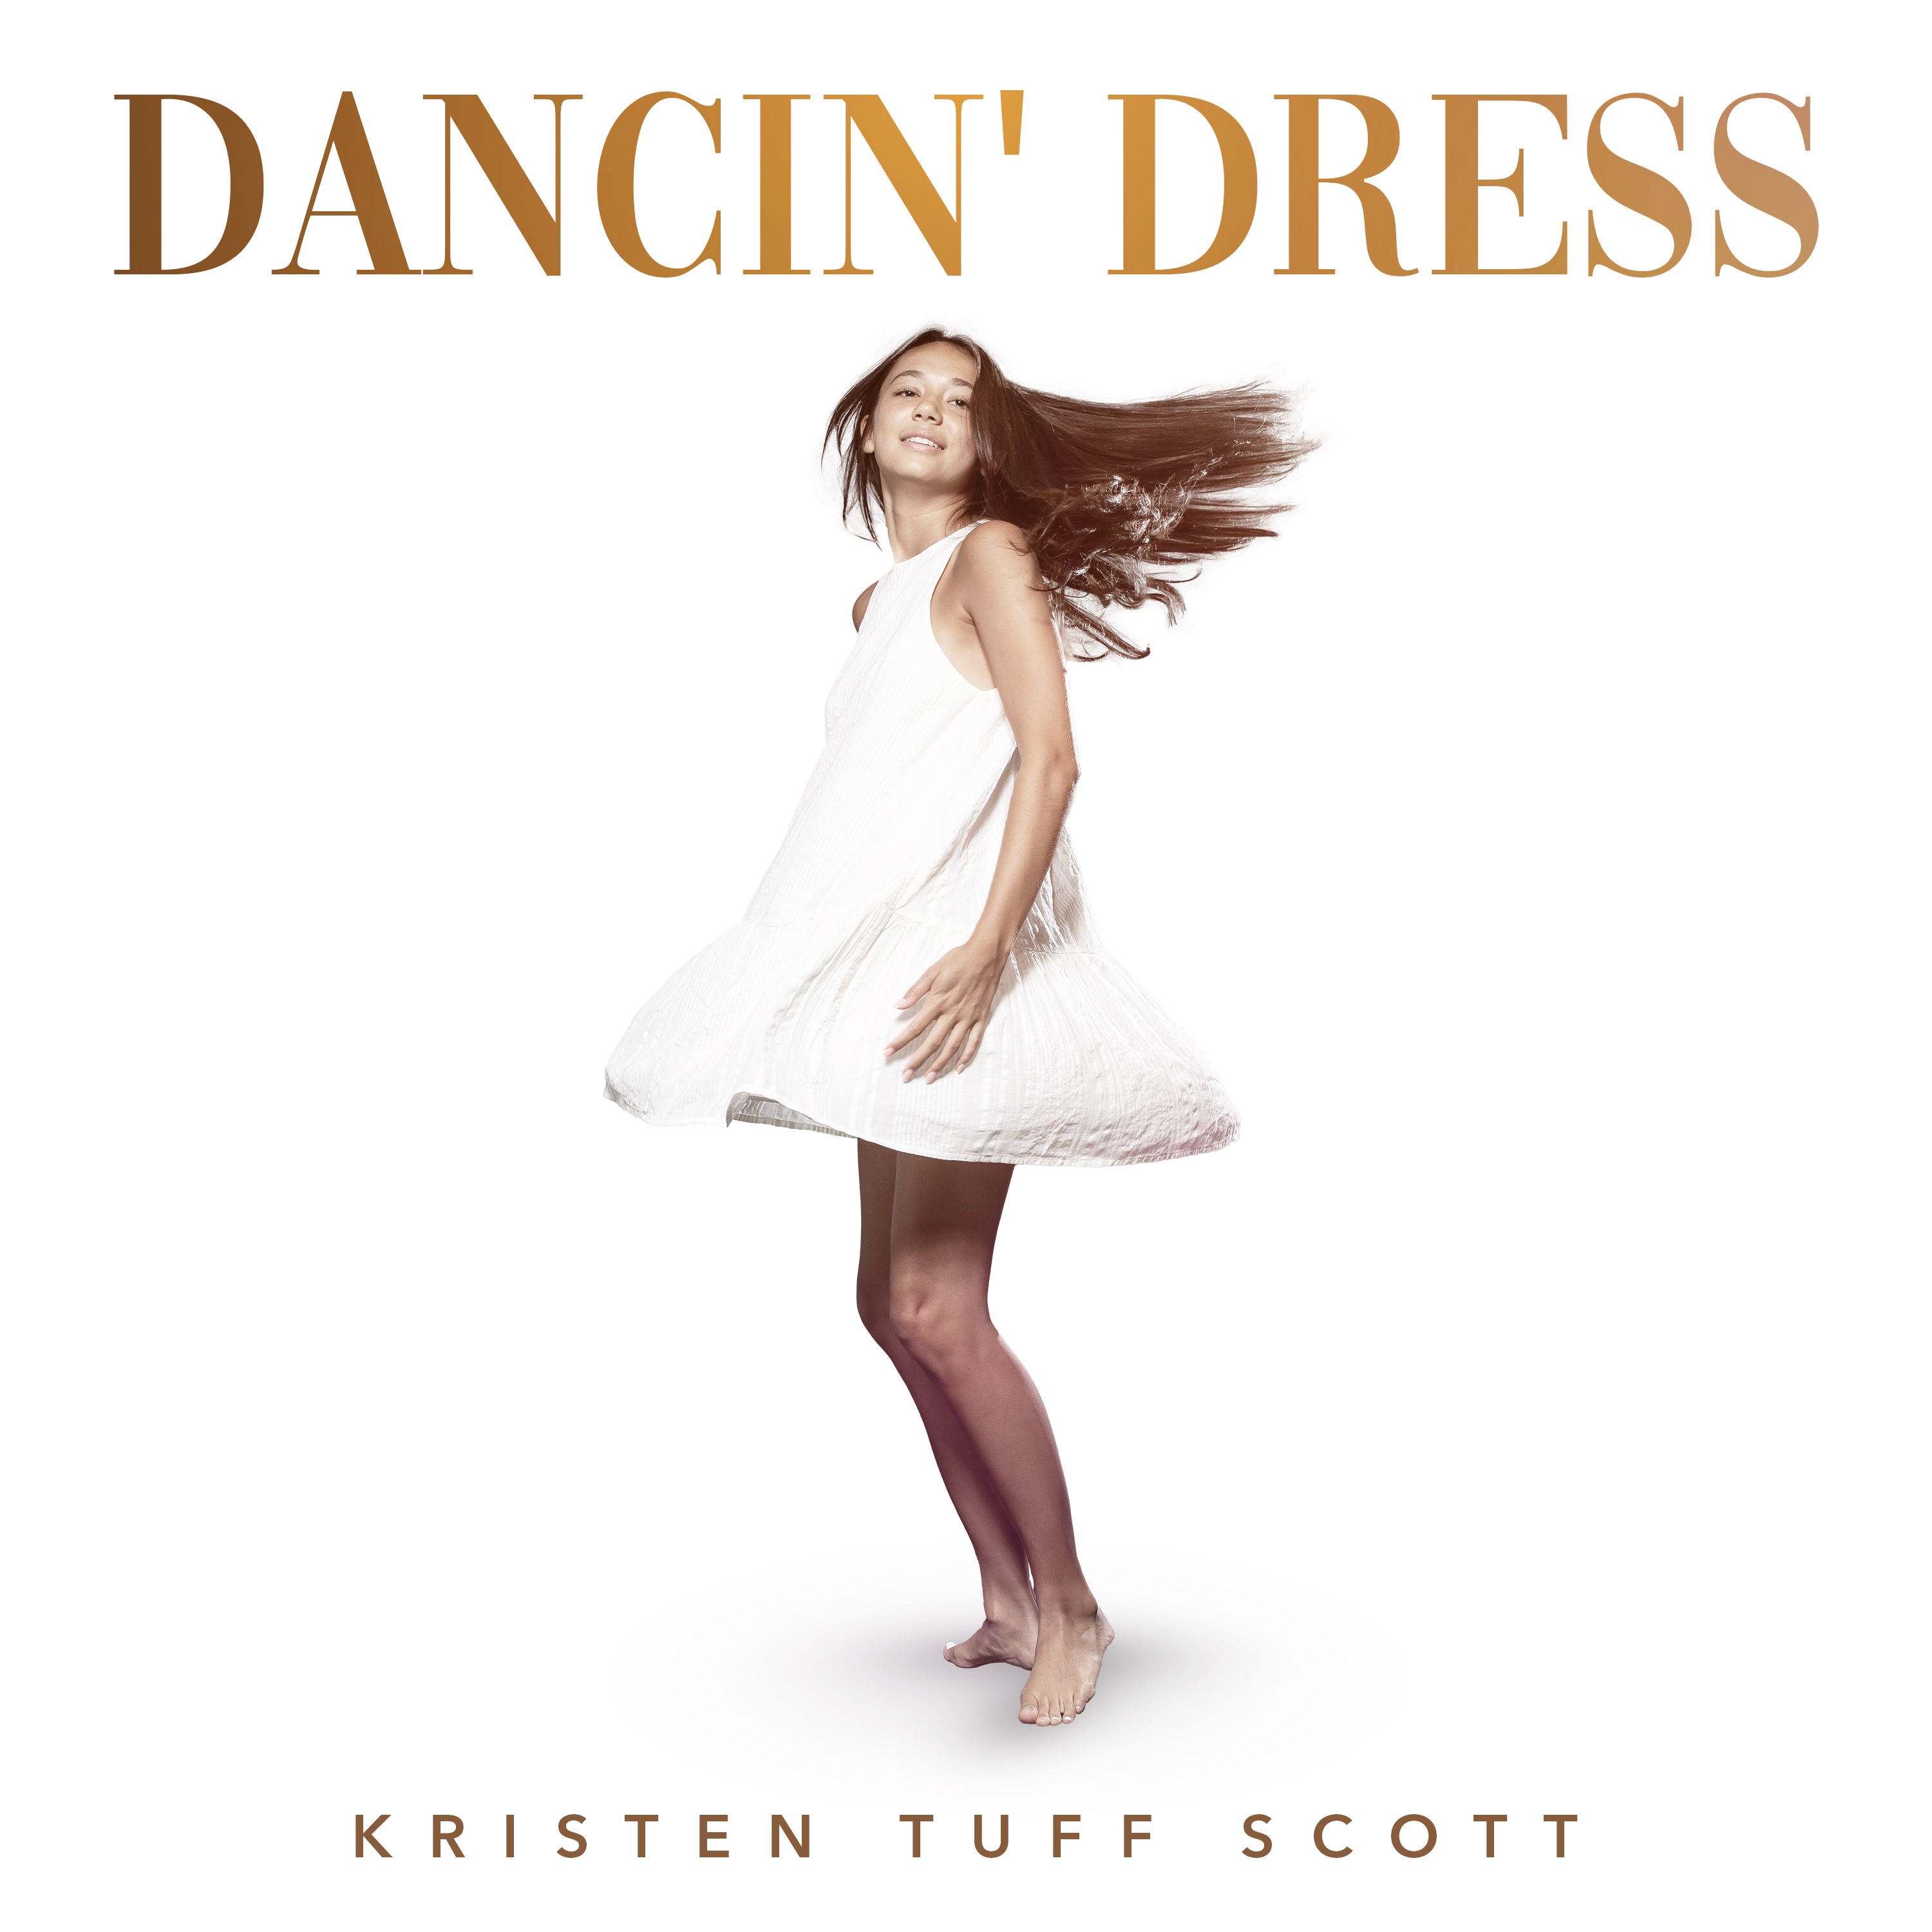 First Time Girl Sings To Another Girl in the Country Music Genre: Country Sensation Kristen Tuff Scott Unveils New Single "Dancin’ Dress"